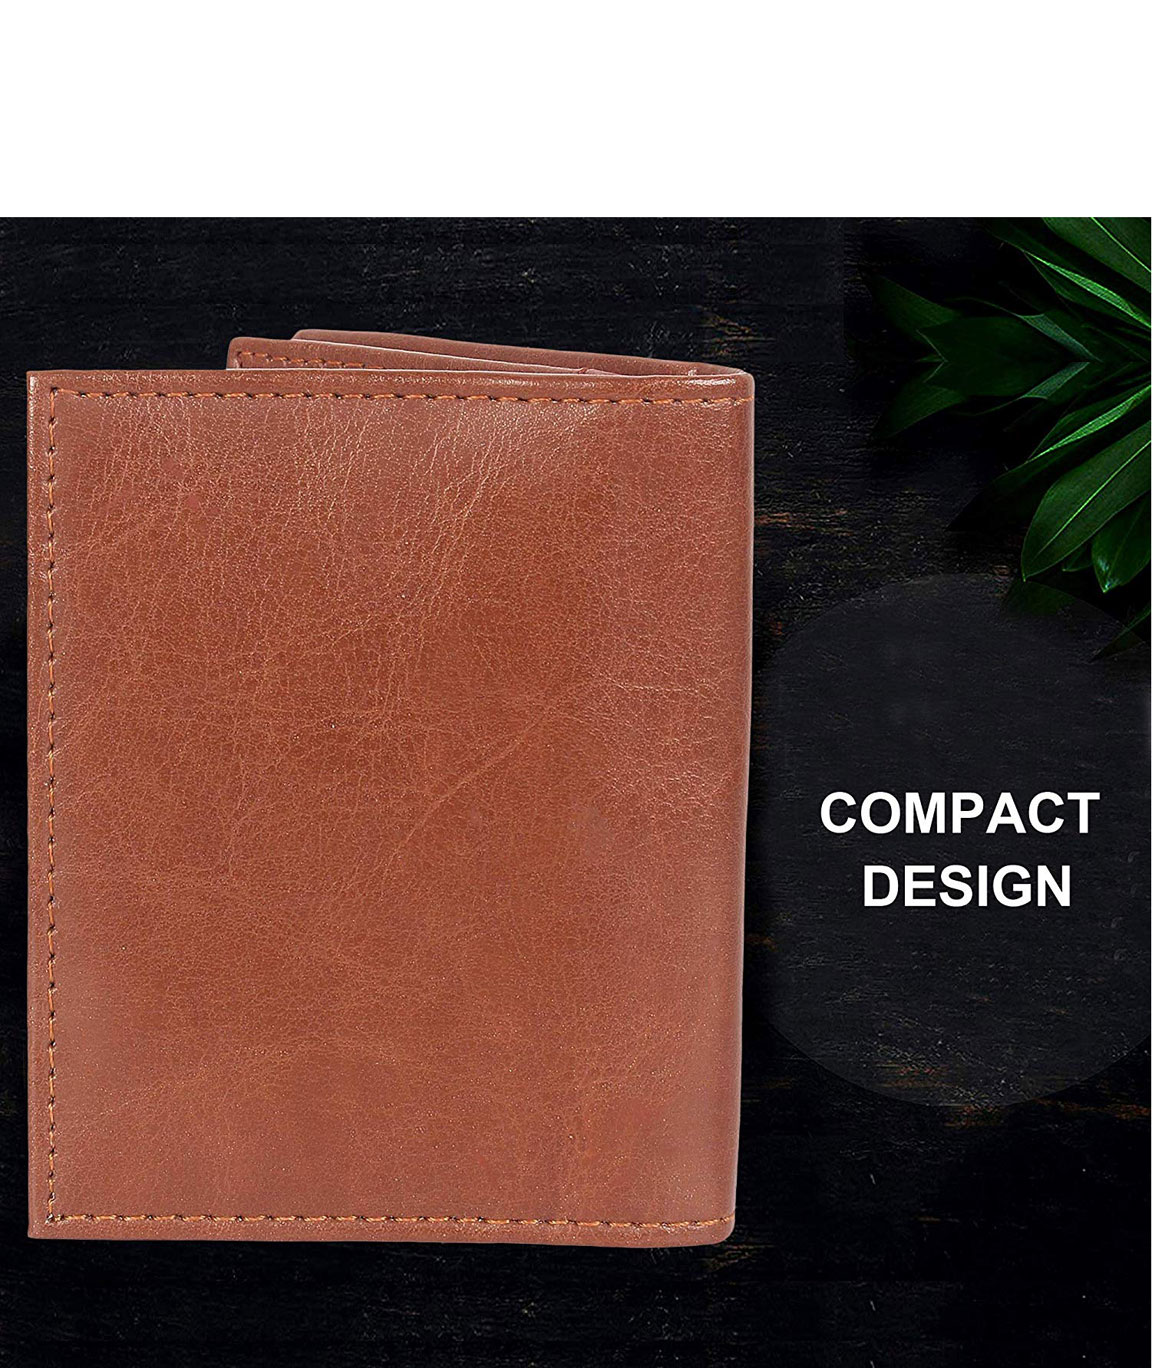 Men's Wallet Genuine Leather Credit Card Holder Coins With Zipper New | eBay